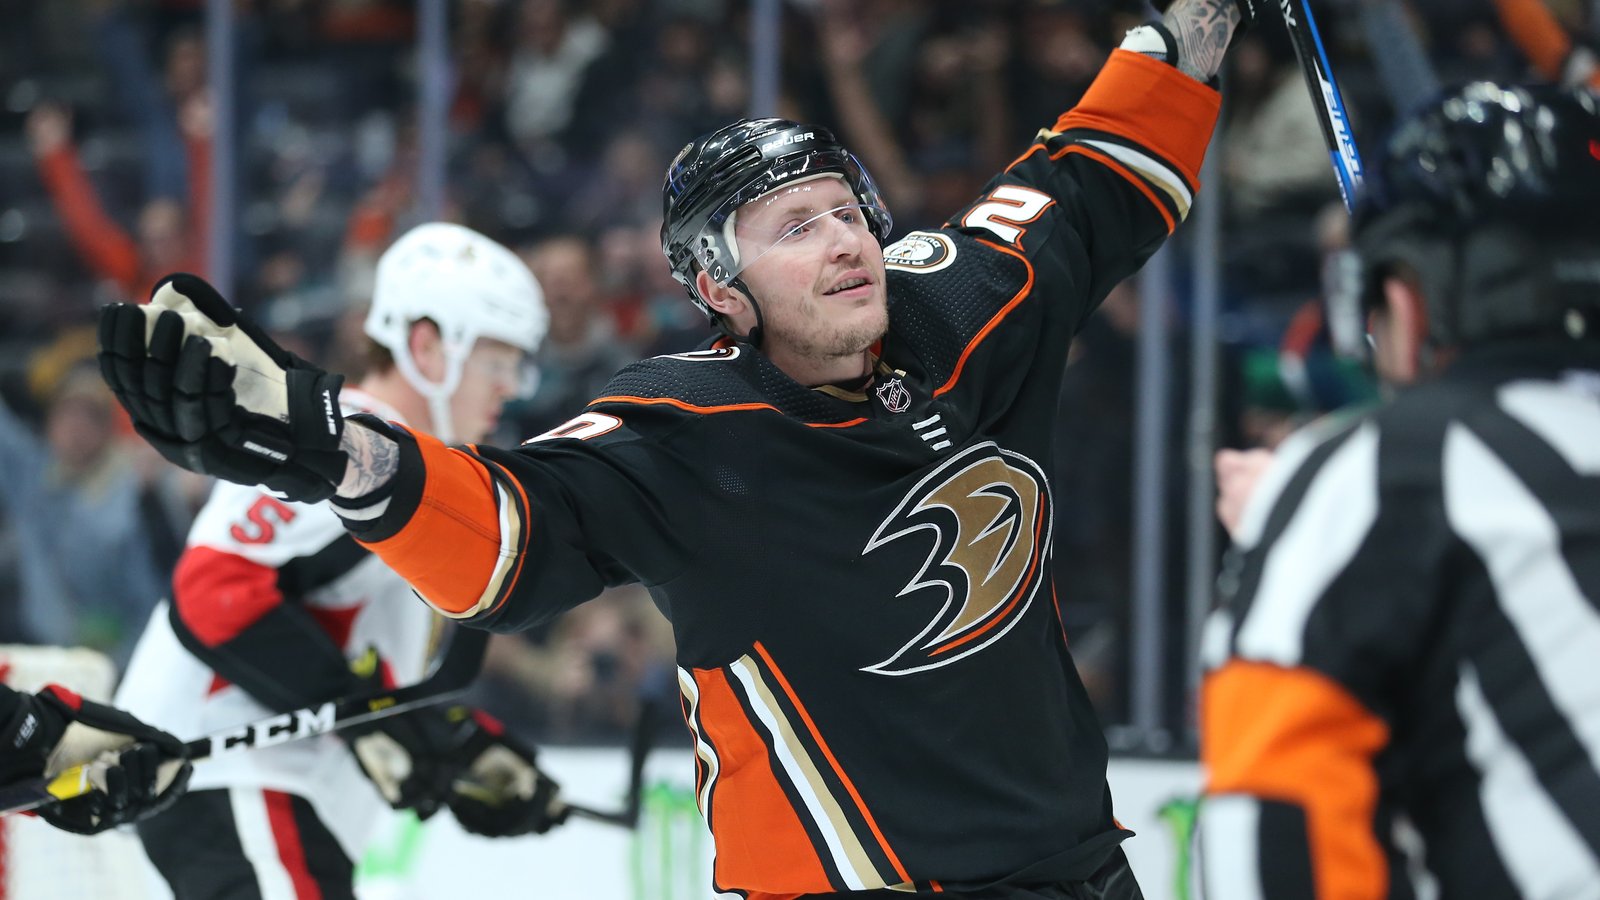 Ducks, Kings release statements after playing Ottawa before pause